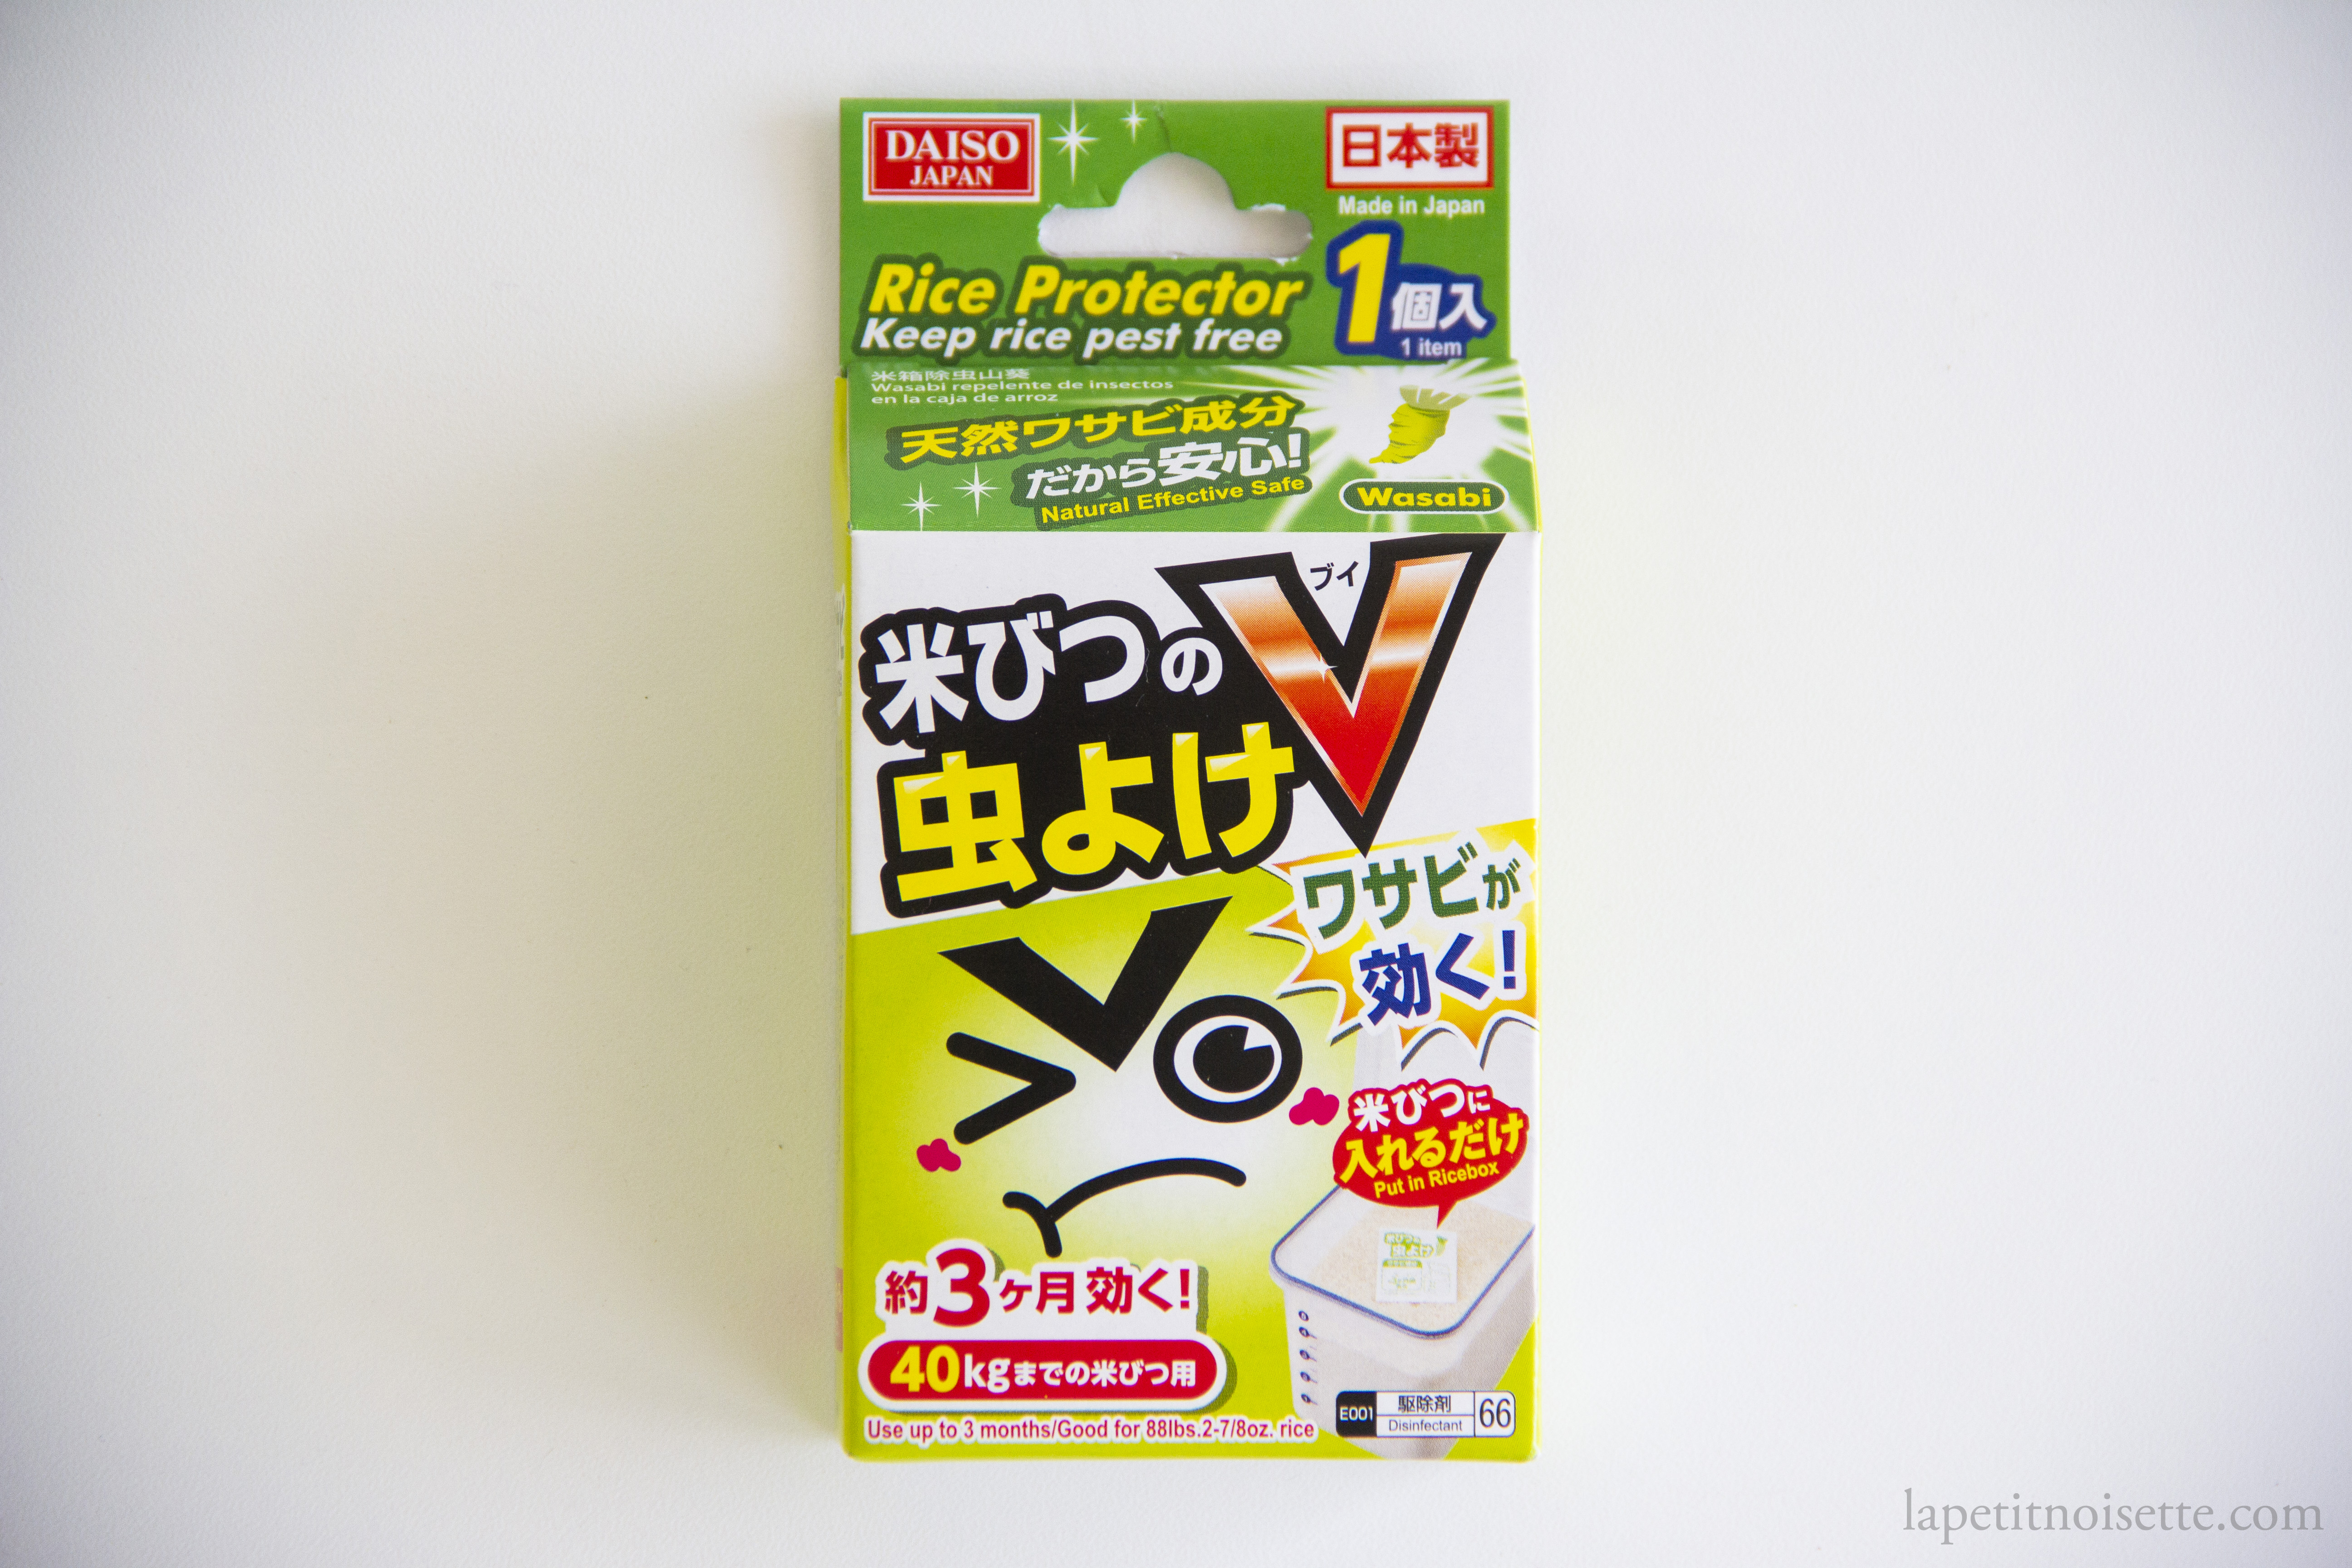 Japanese rice insect repellent